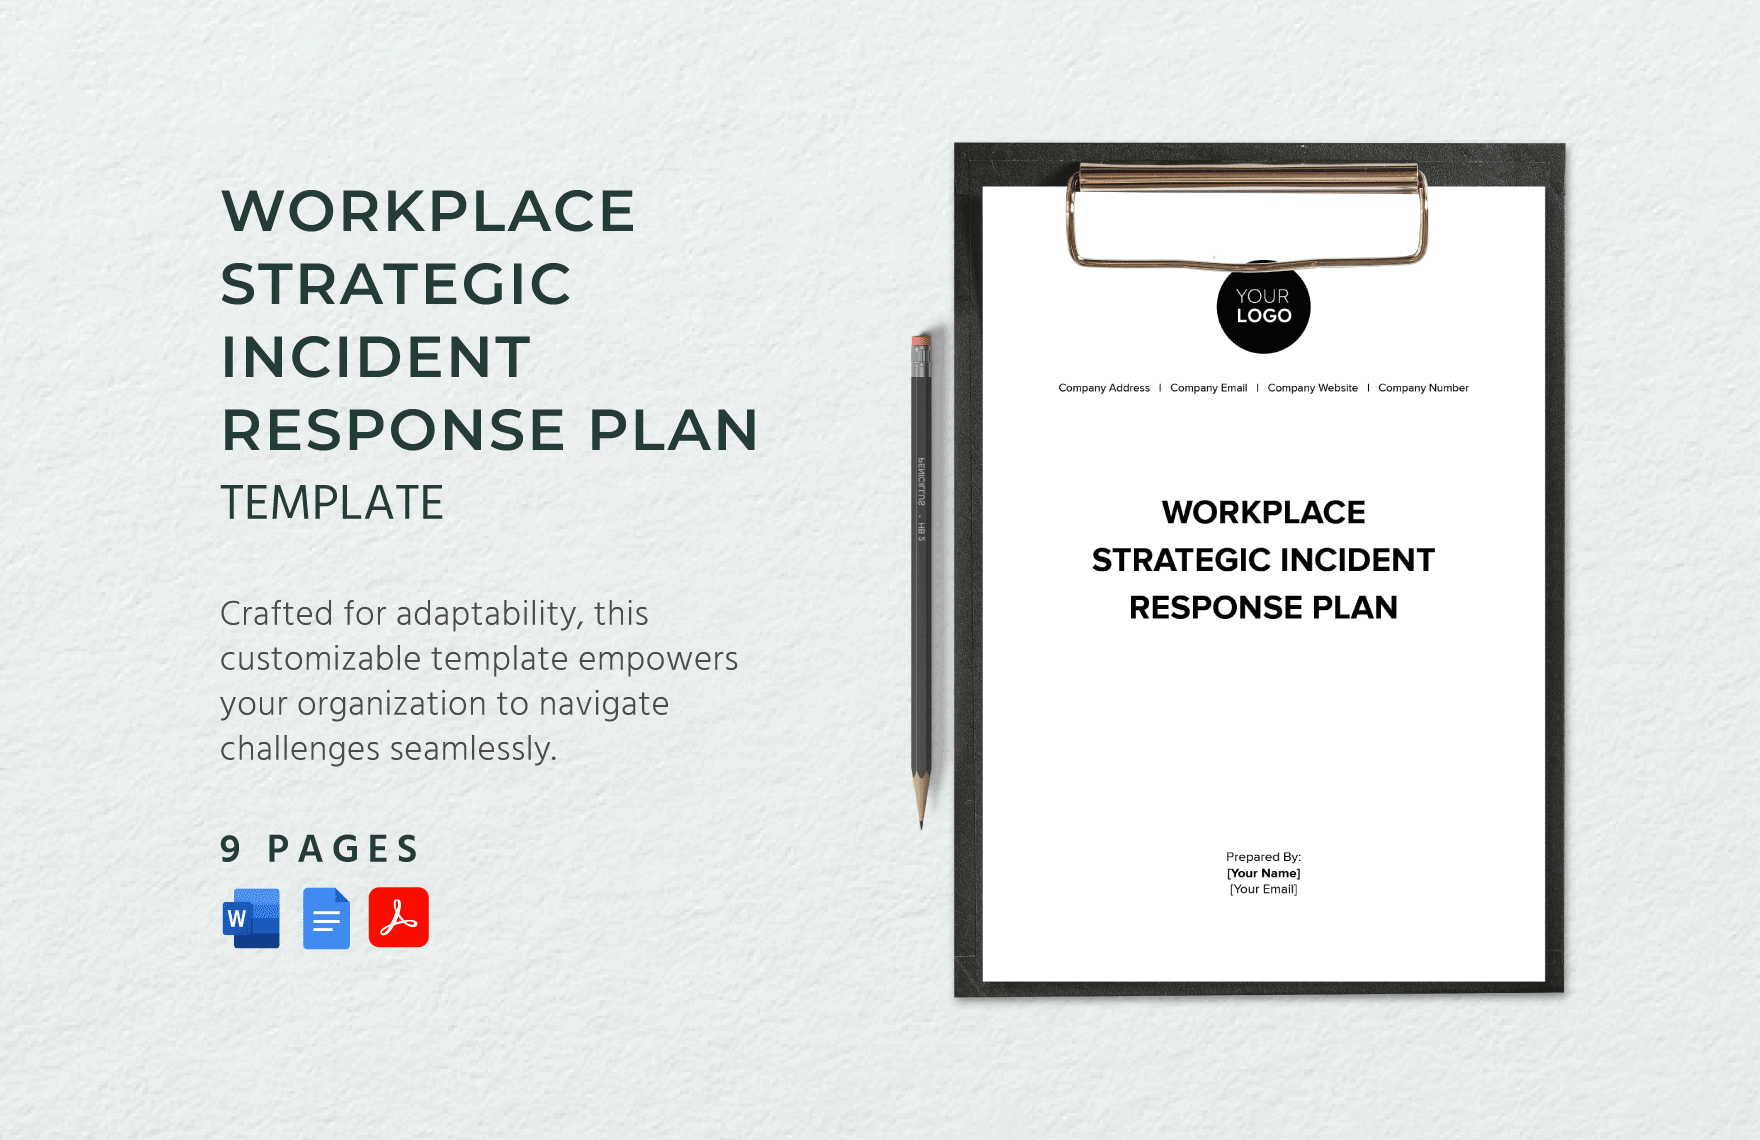 Workplace Strategic Incident Response Plan Template